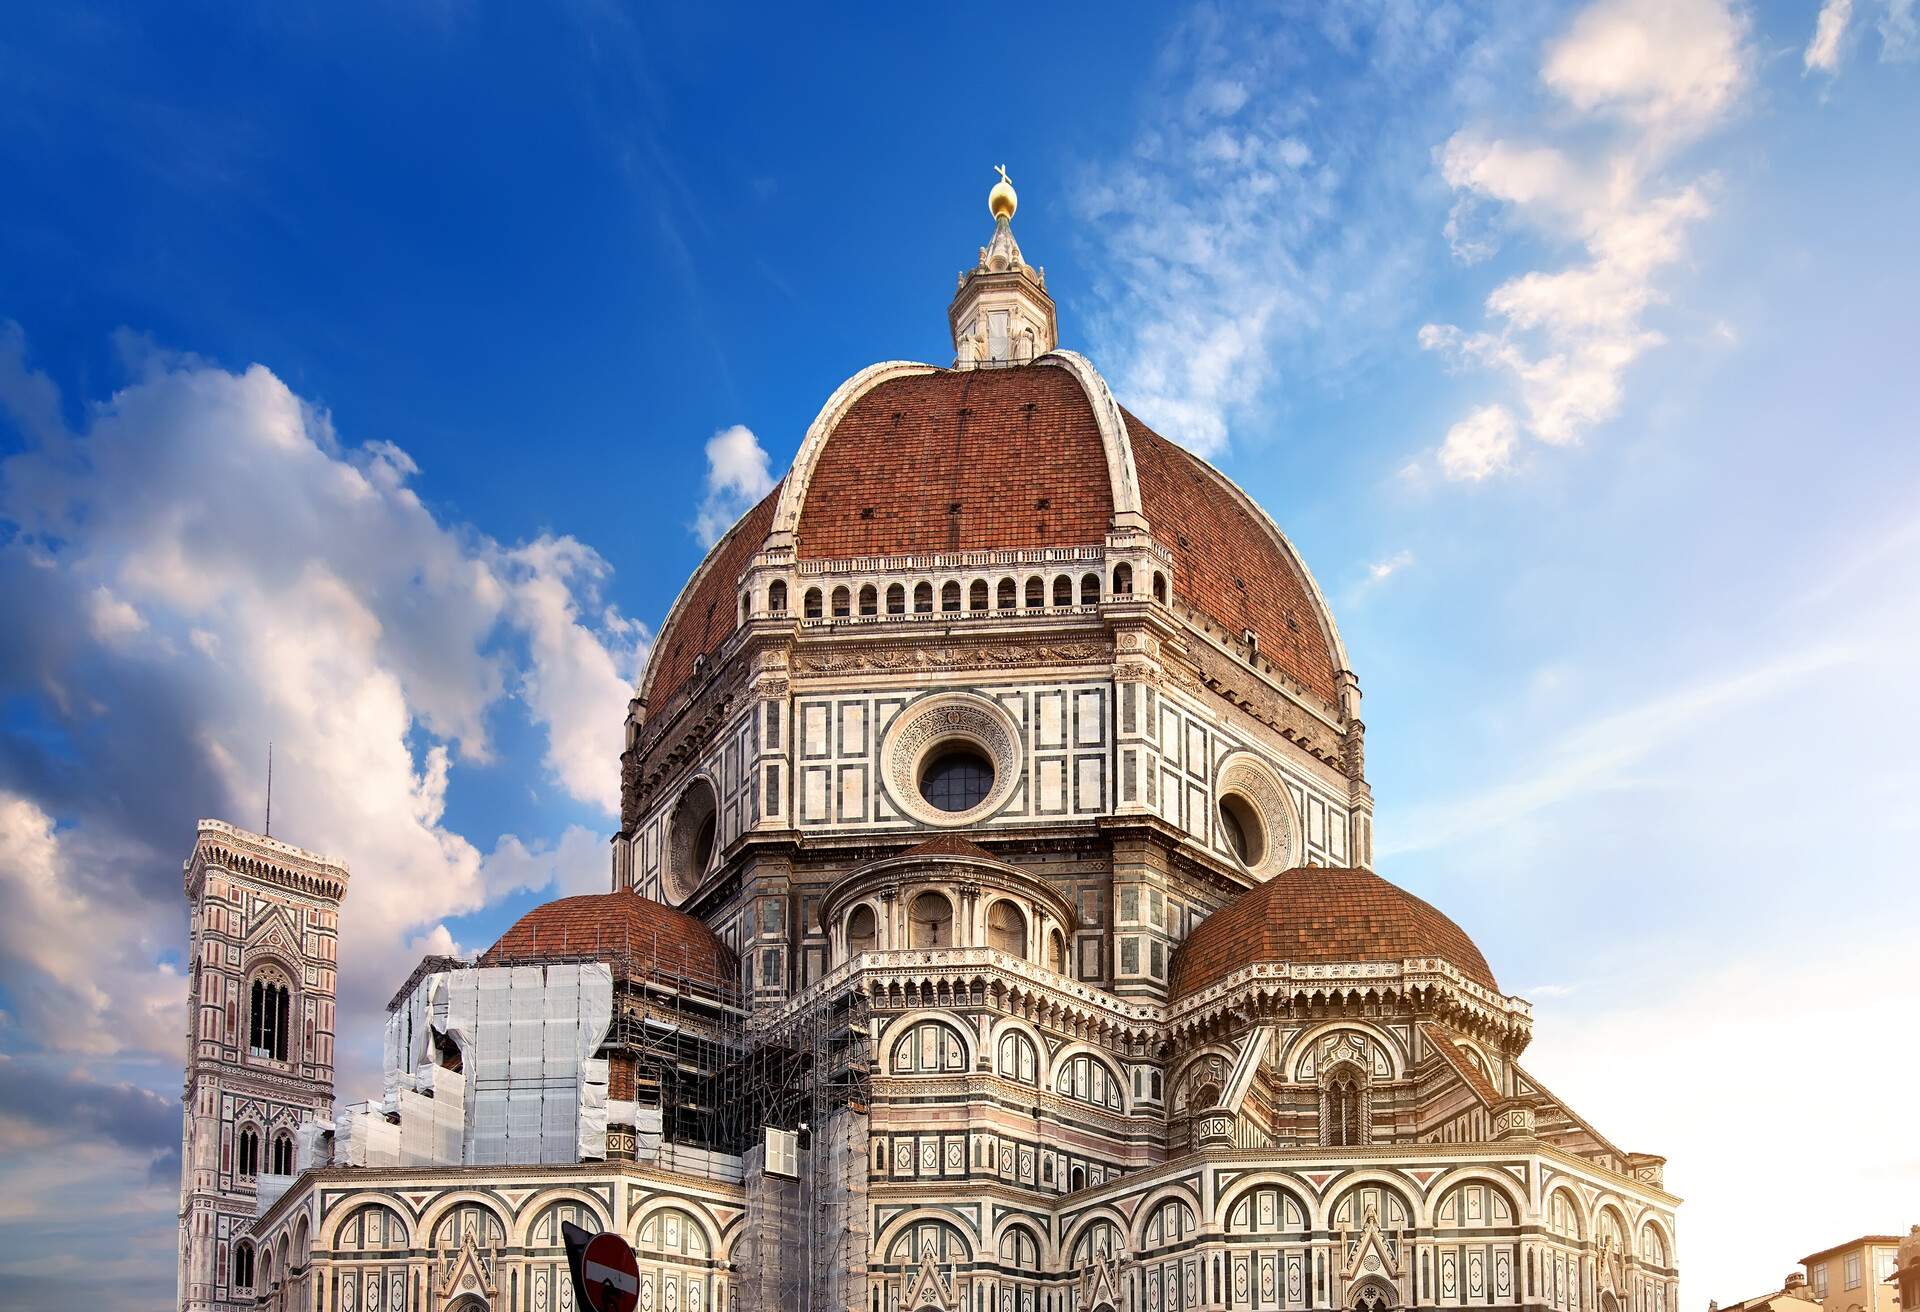 DEST_ITALY_FLORENCE_FLORENCE_CATHEDRAL GettyImages-852835094